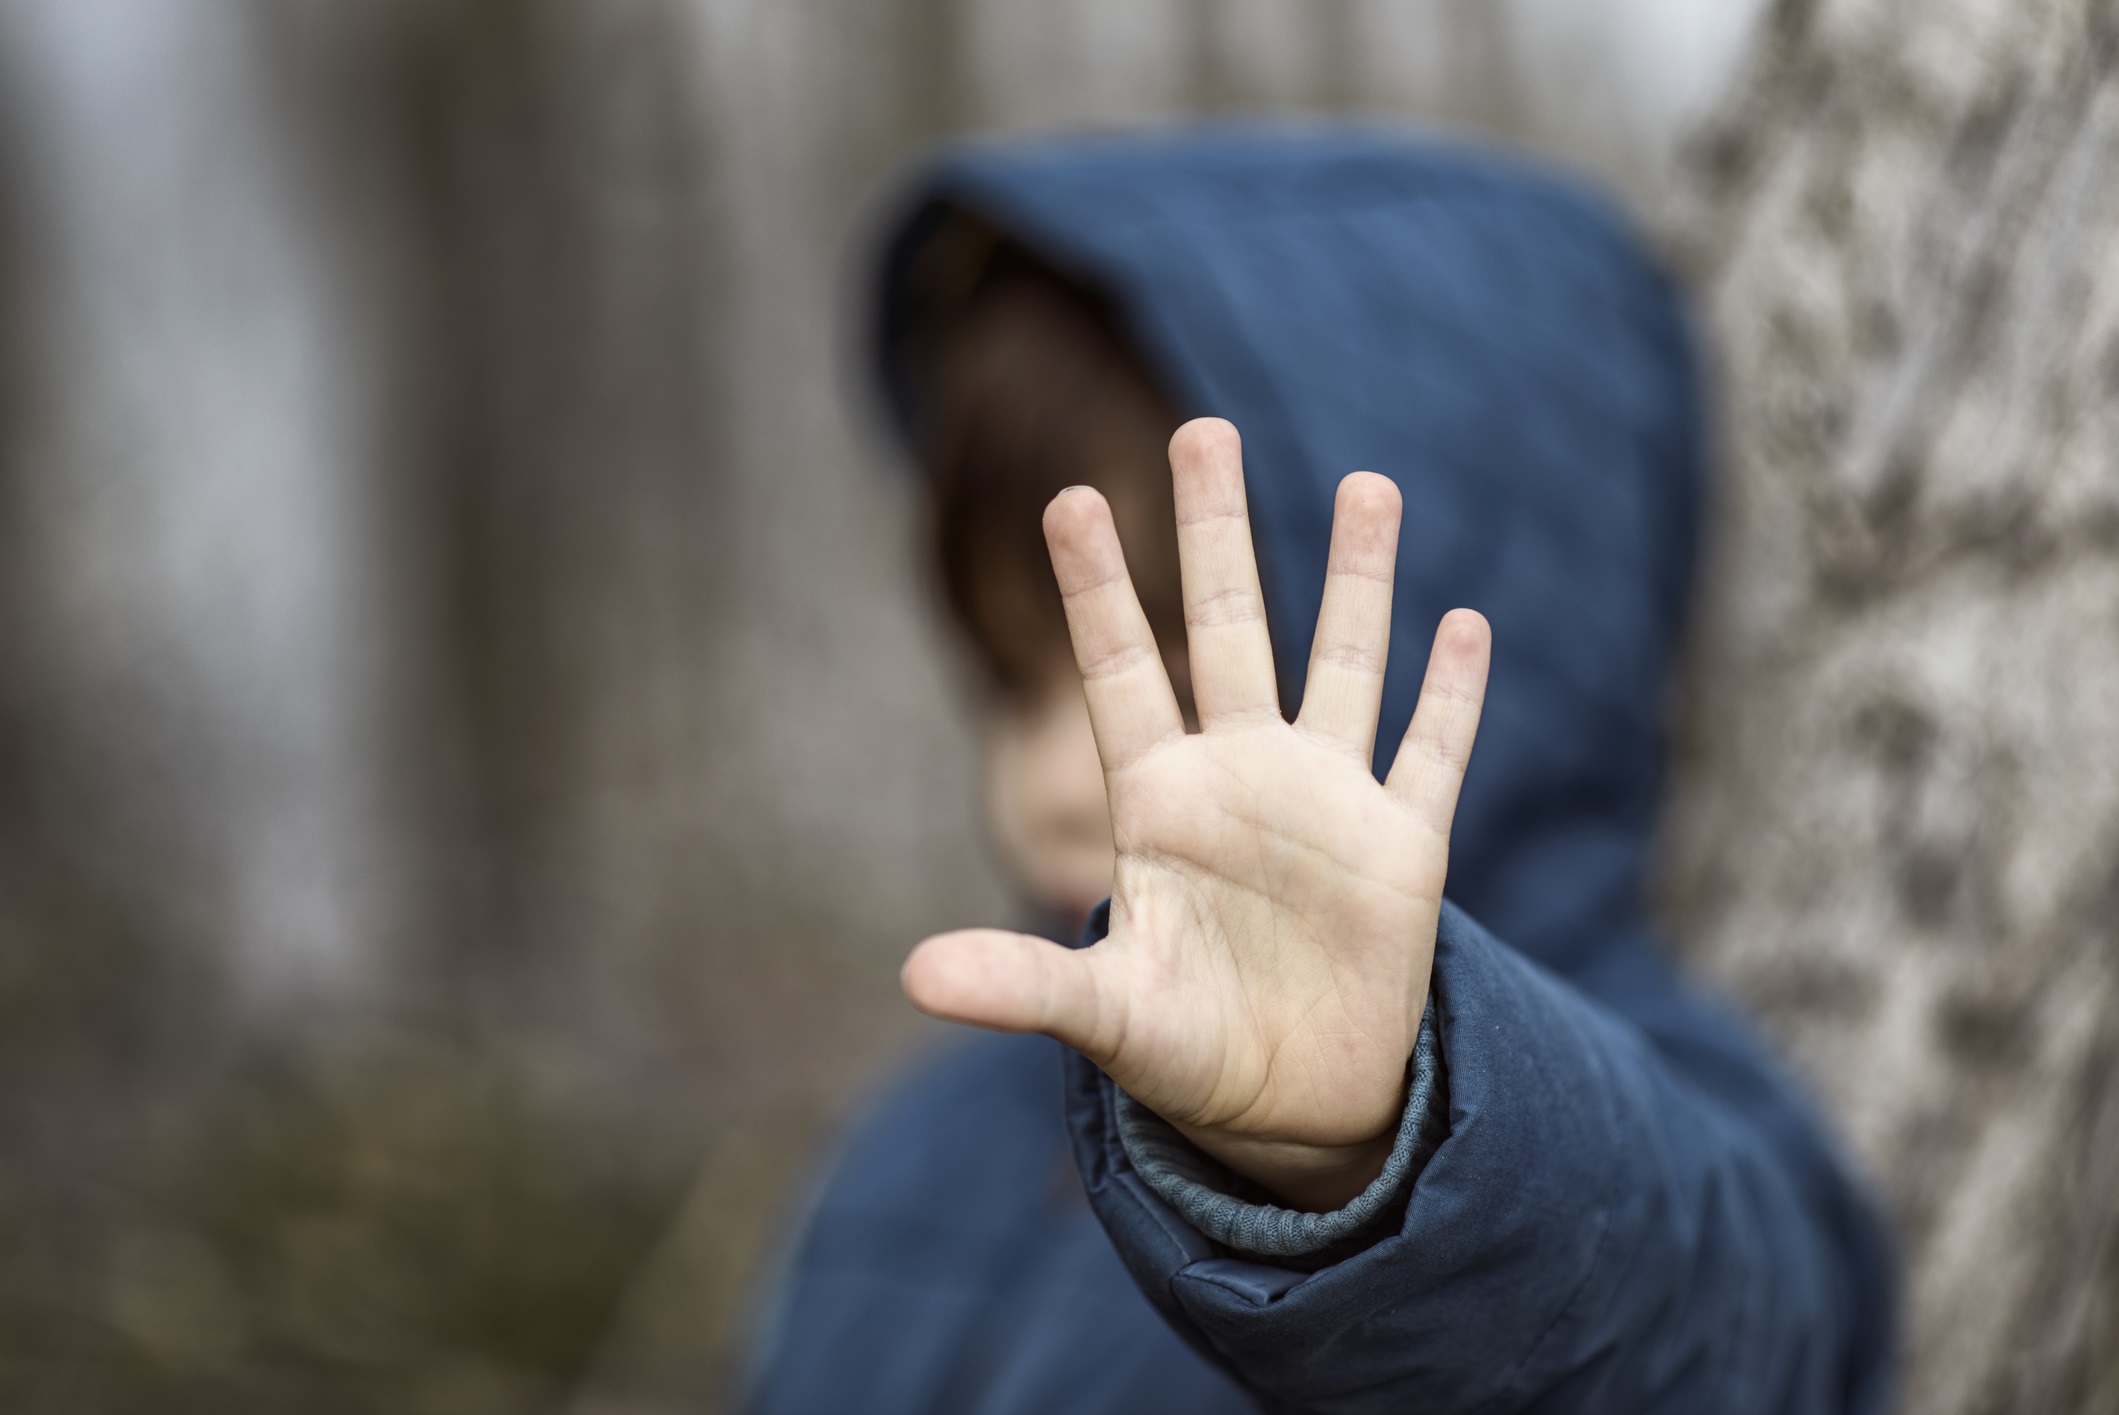 A child wearing a sweatshirt with a hood is seen out of focus and puts his hand up toward the camera.